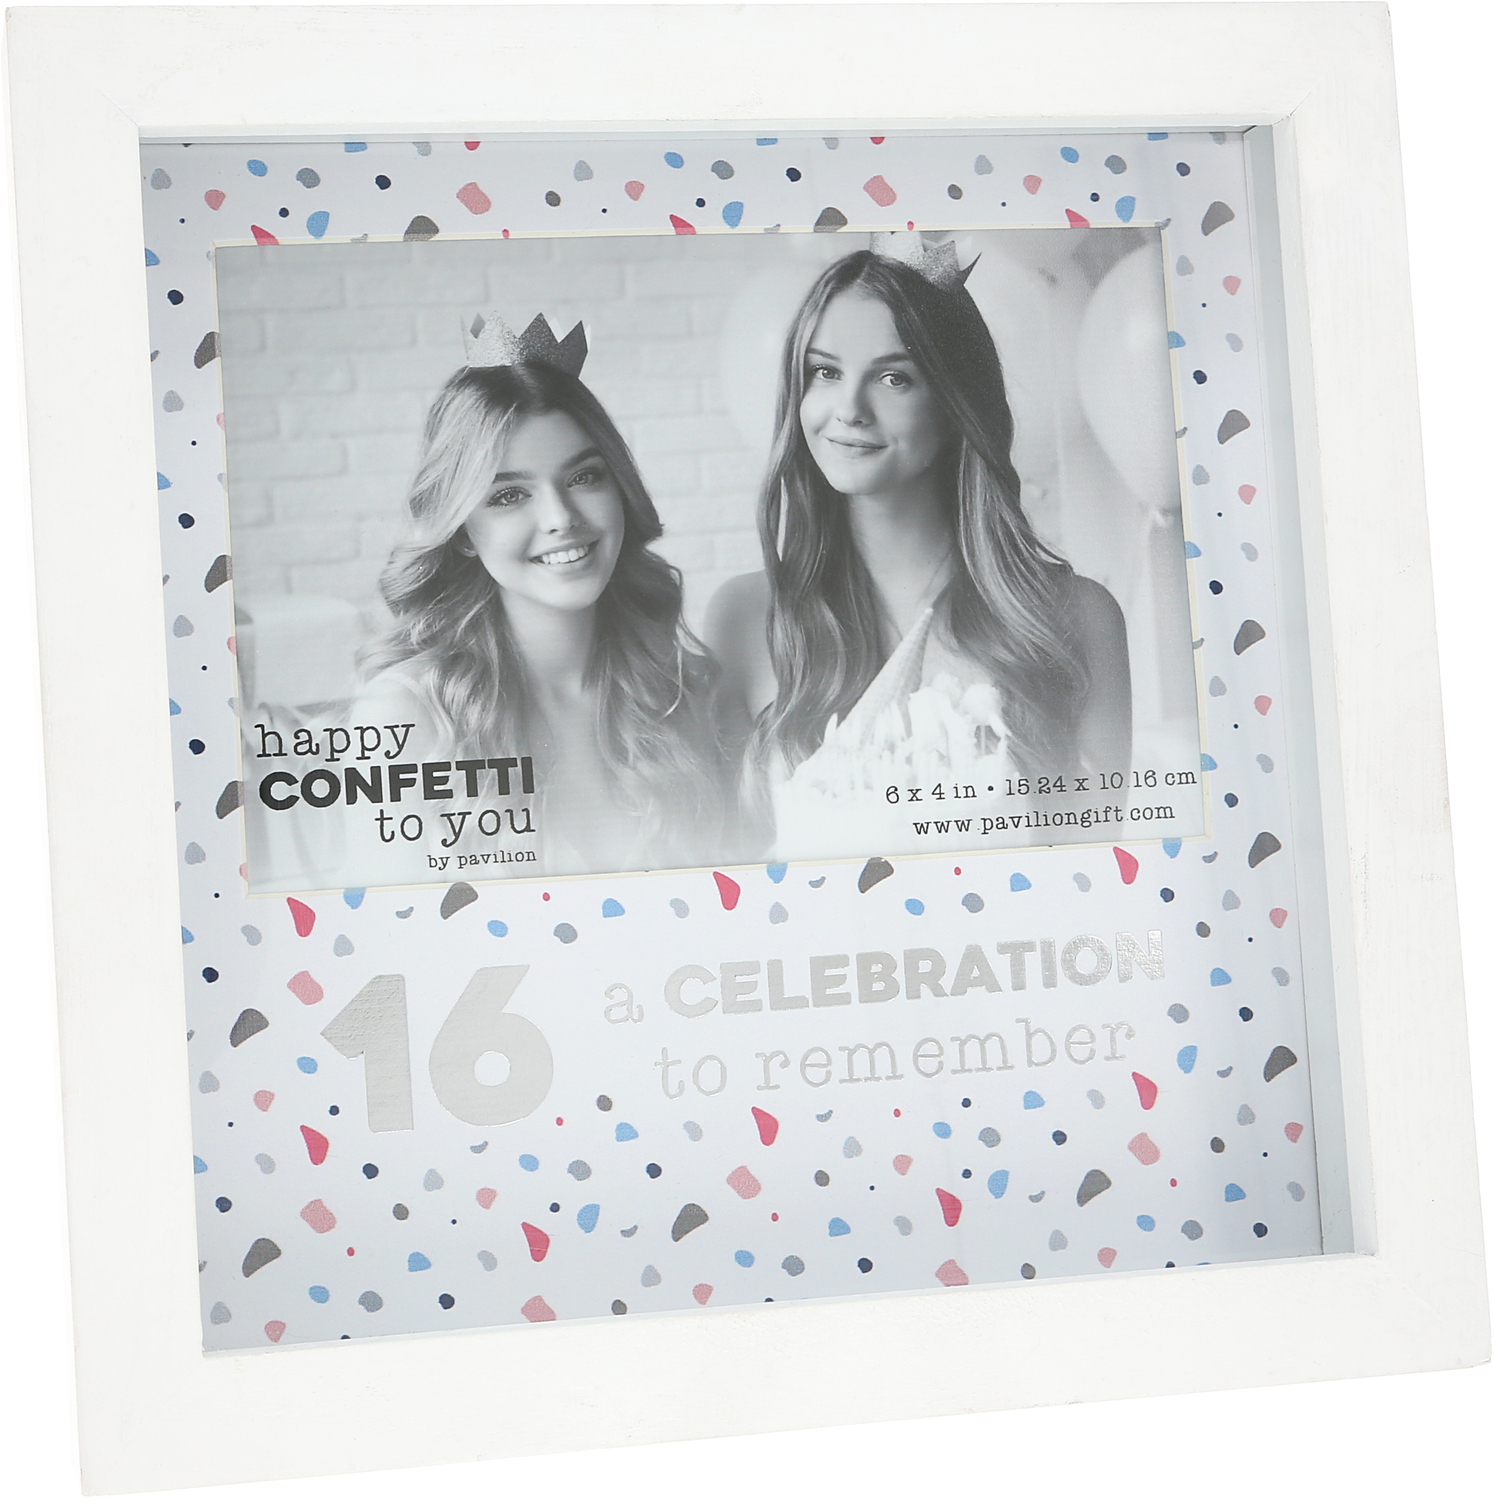 16 by Happy Confetti to You - 16 - 7.5" Shadow Box Frame
(Holds 6" x 4" Photo)